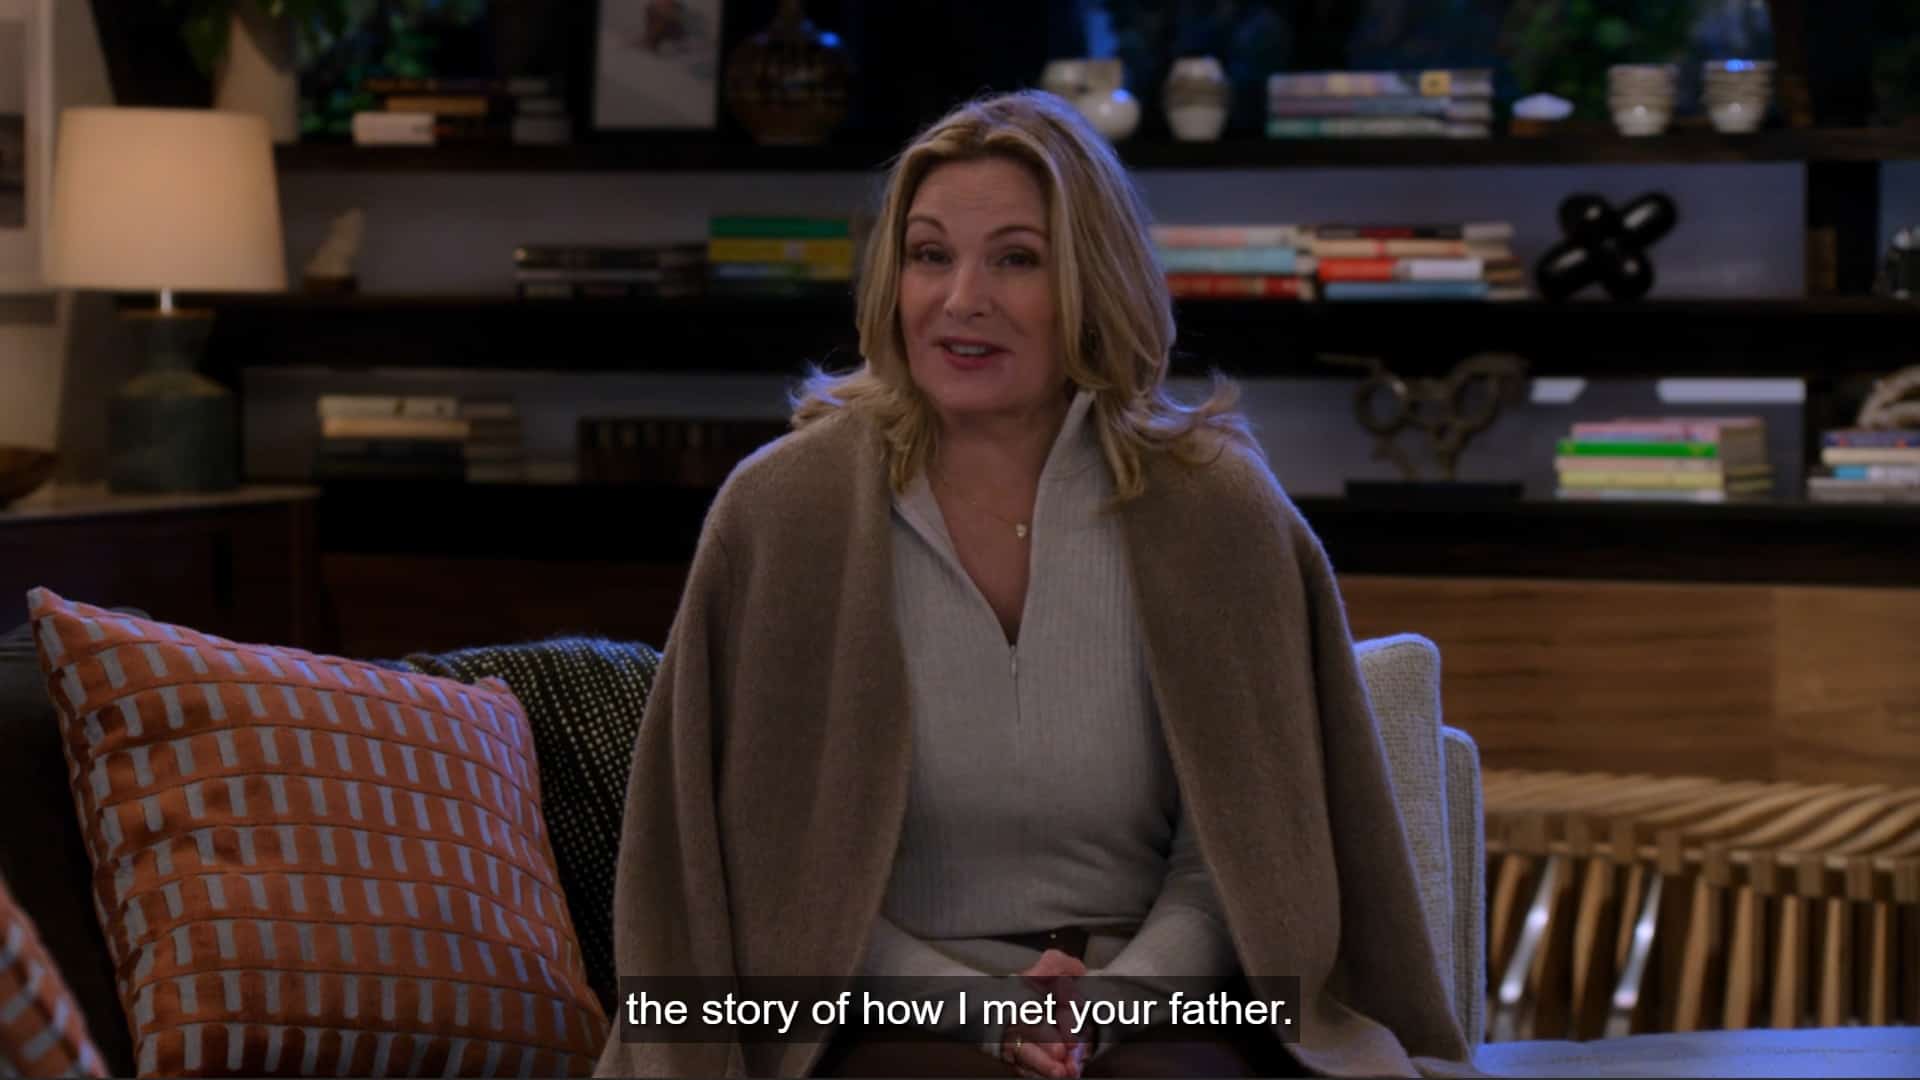 How I Met Your Father: Season 1/ Episode 1 “Pilot”- Recap/Review (with Spoilers)